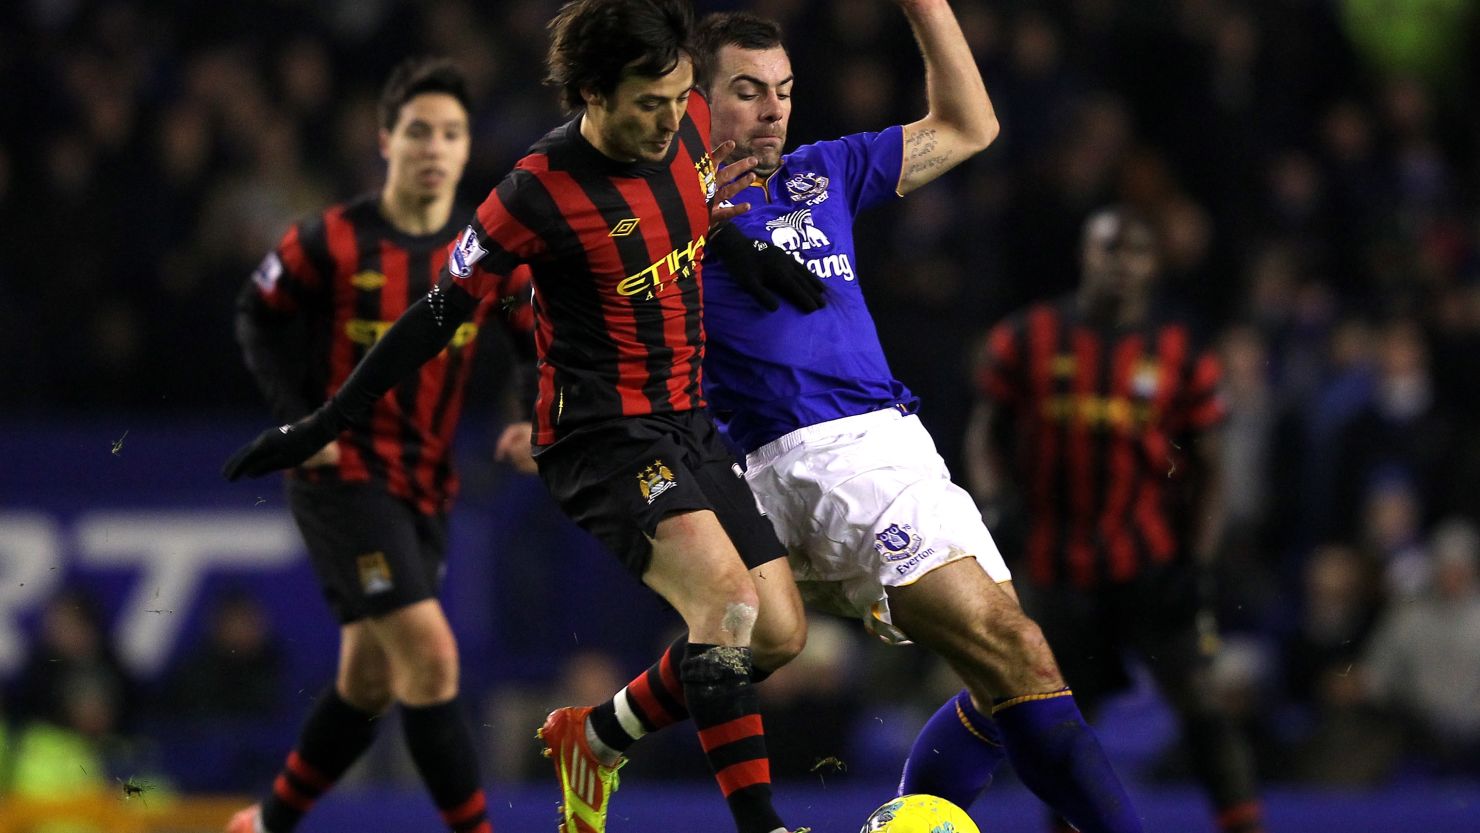 Everton's goalscorer Darron Gibson (R) tussles with David Silva during the league match at Goodison Park 